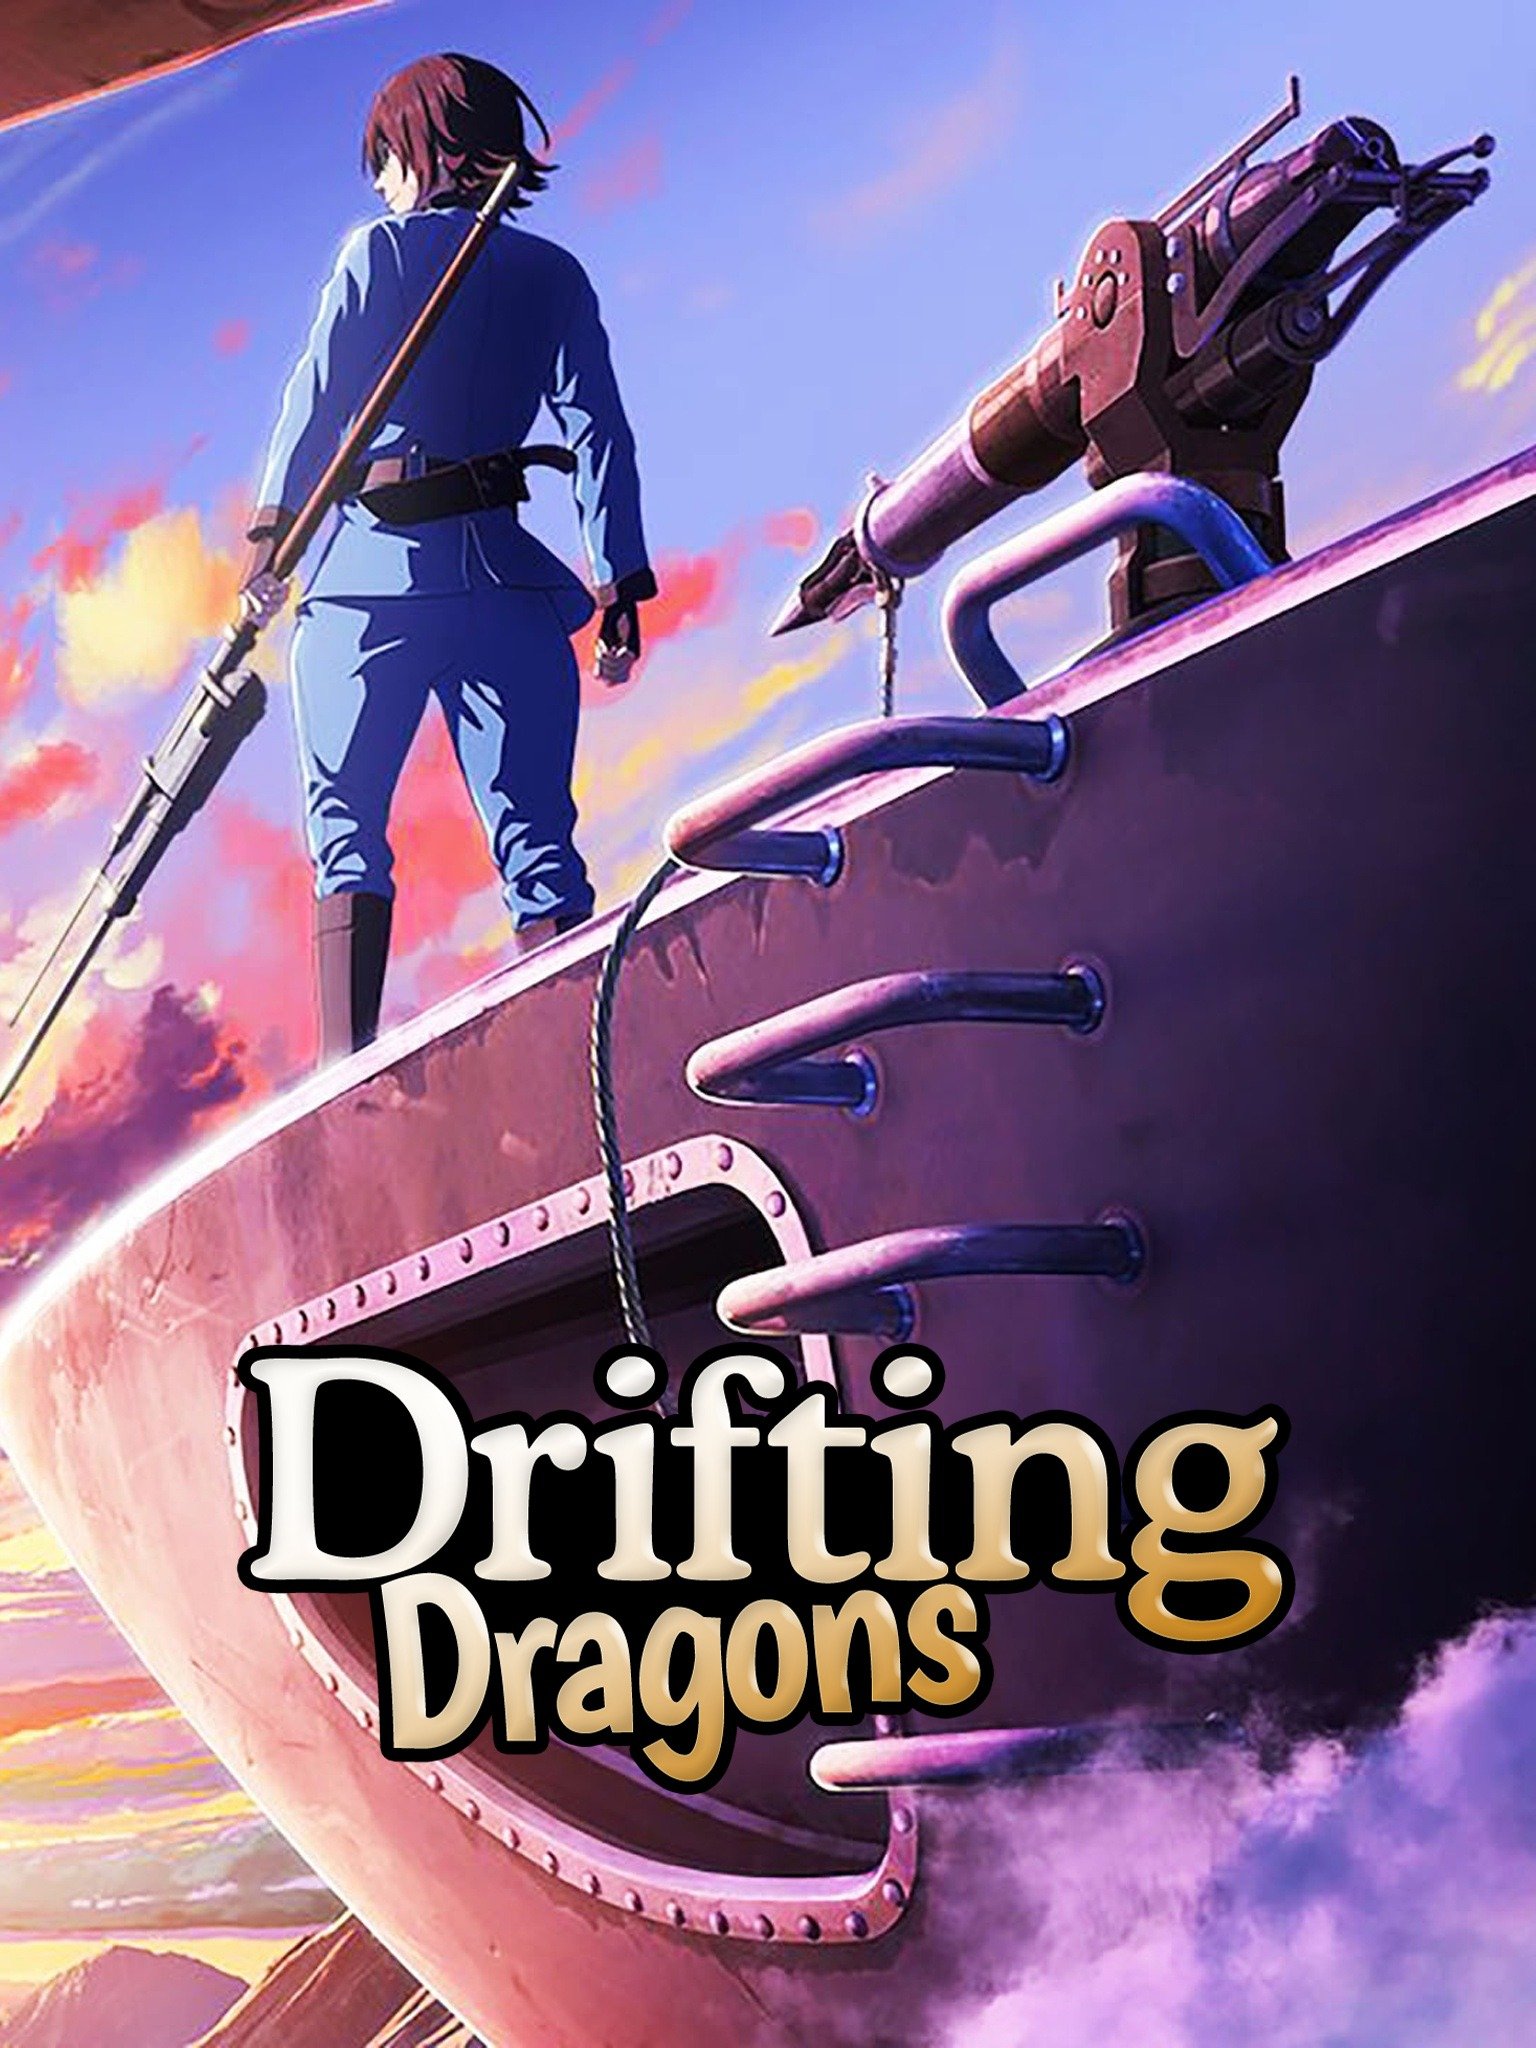 Drifting Dragons Season 1 Ending Explained Tearful goodbyes a little  growth and a promise of more to come  MEAWW